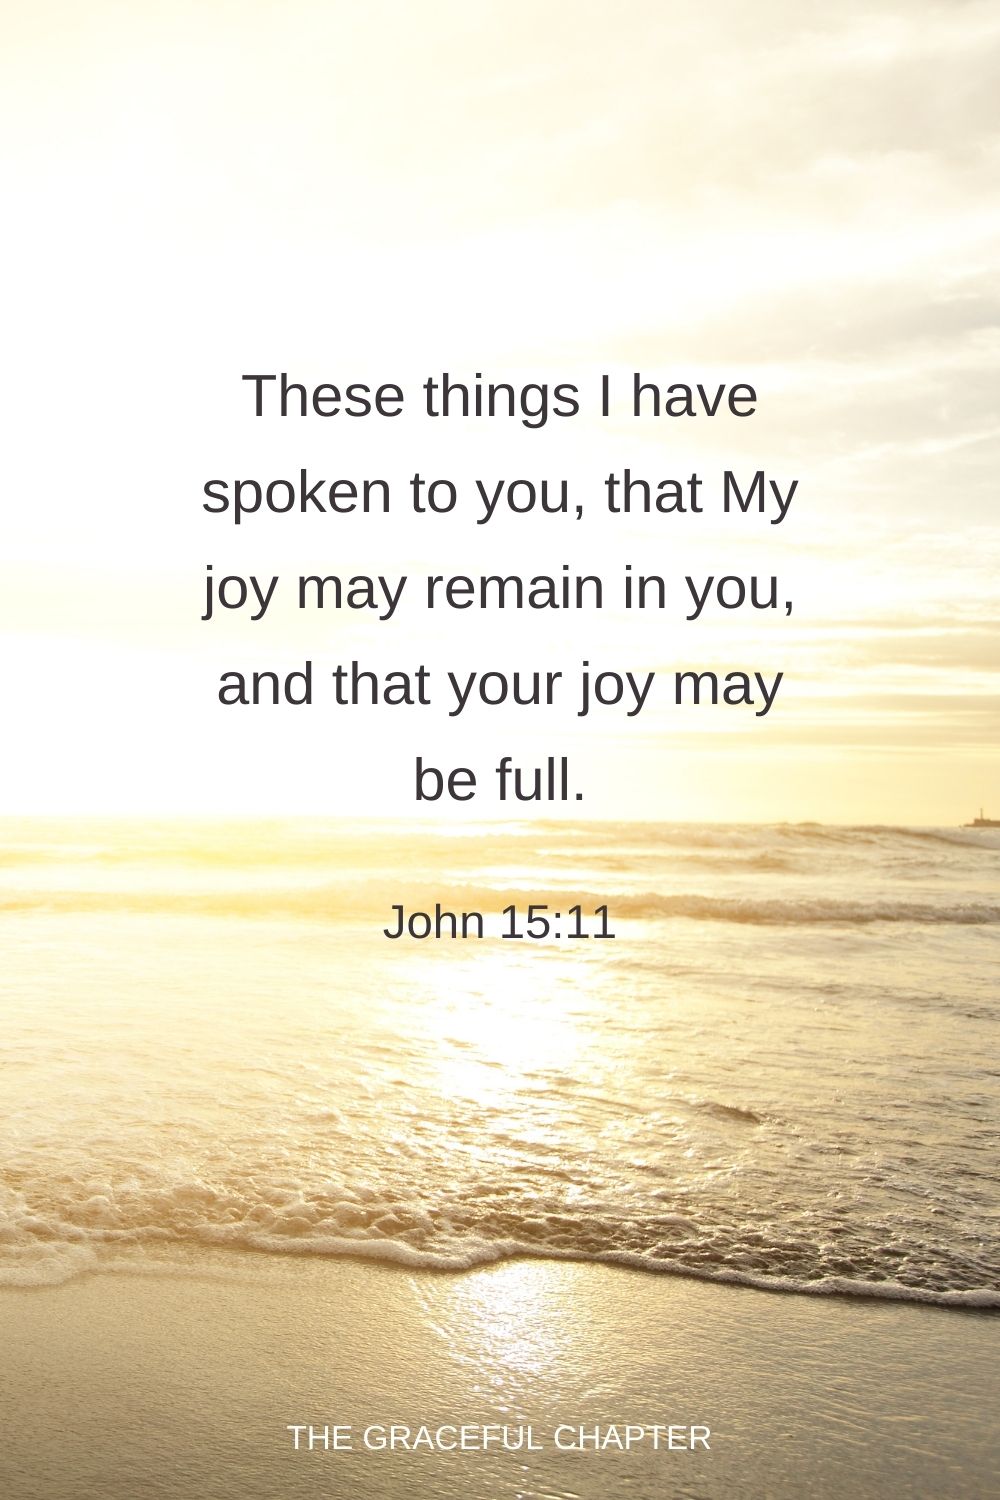 These things I have spoken to you, that My joy may remain in you, and that your joy may be full. John 15:11